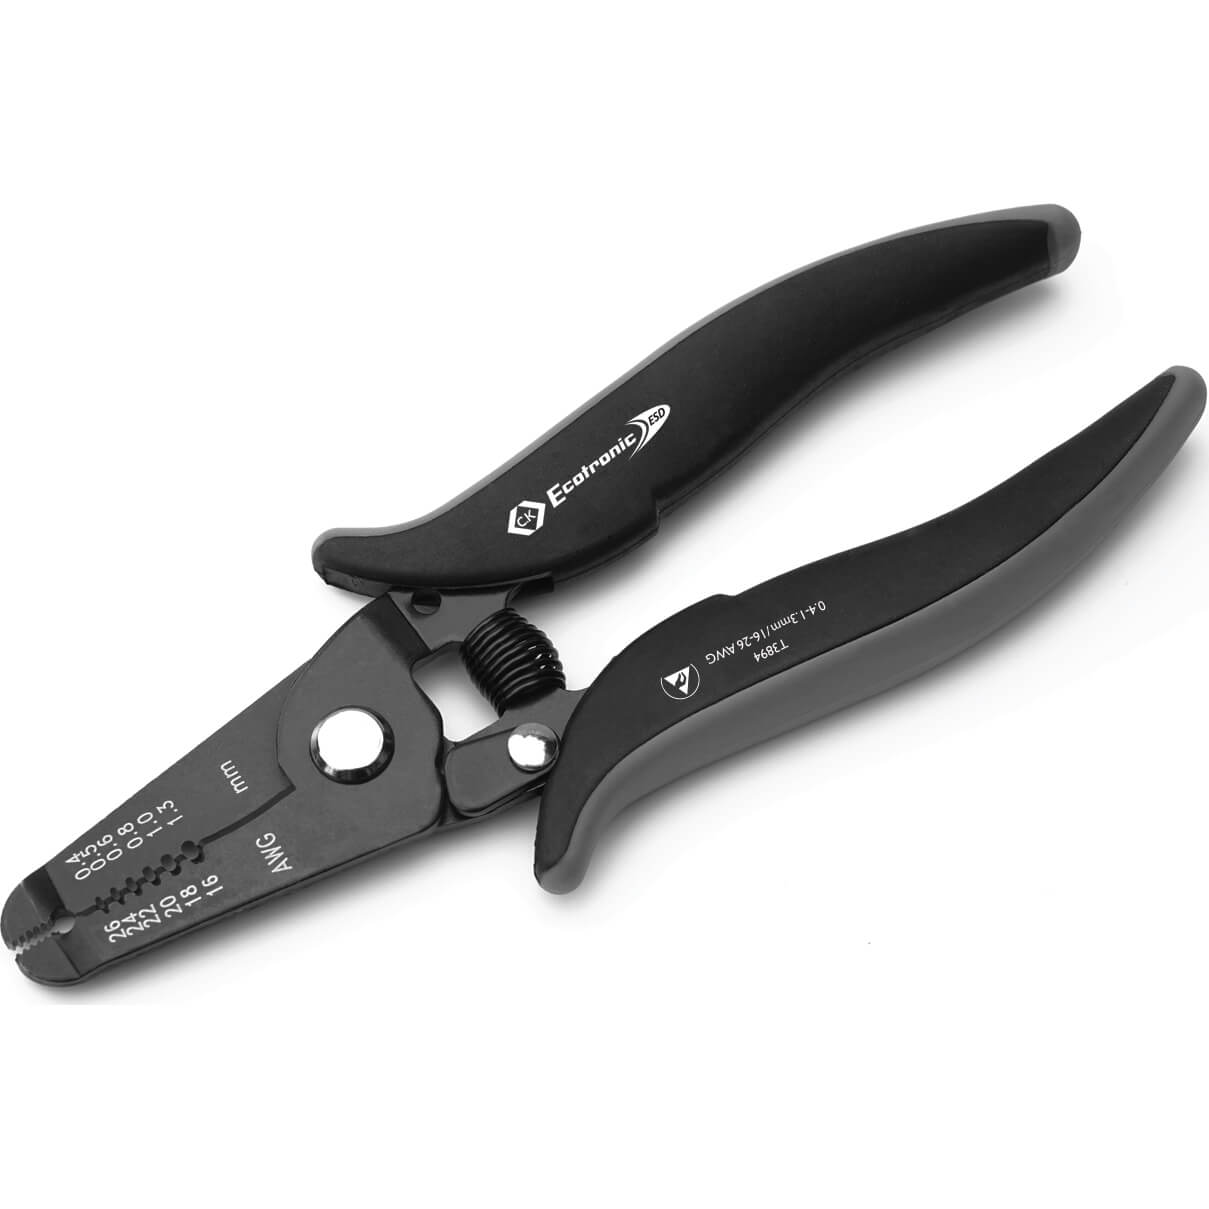 Image of CK Ecotronic ESD Wire Stripping Pliers 0.4mm - 1.3mm